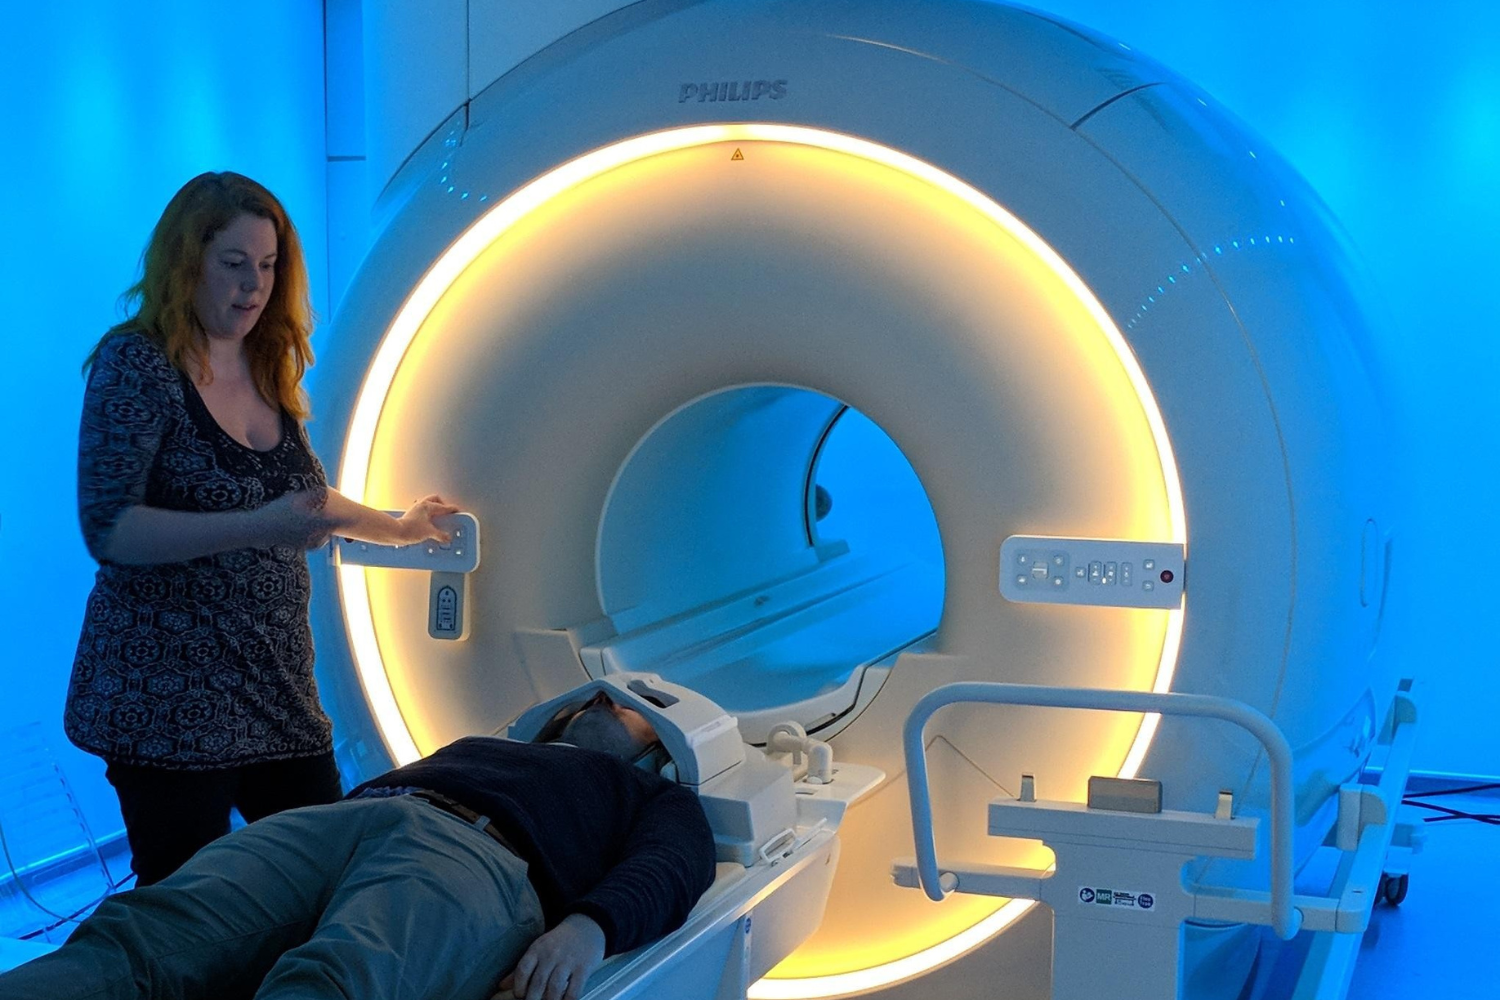 Person being prepped for entry into MRI scanning